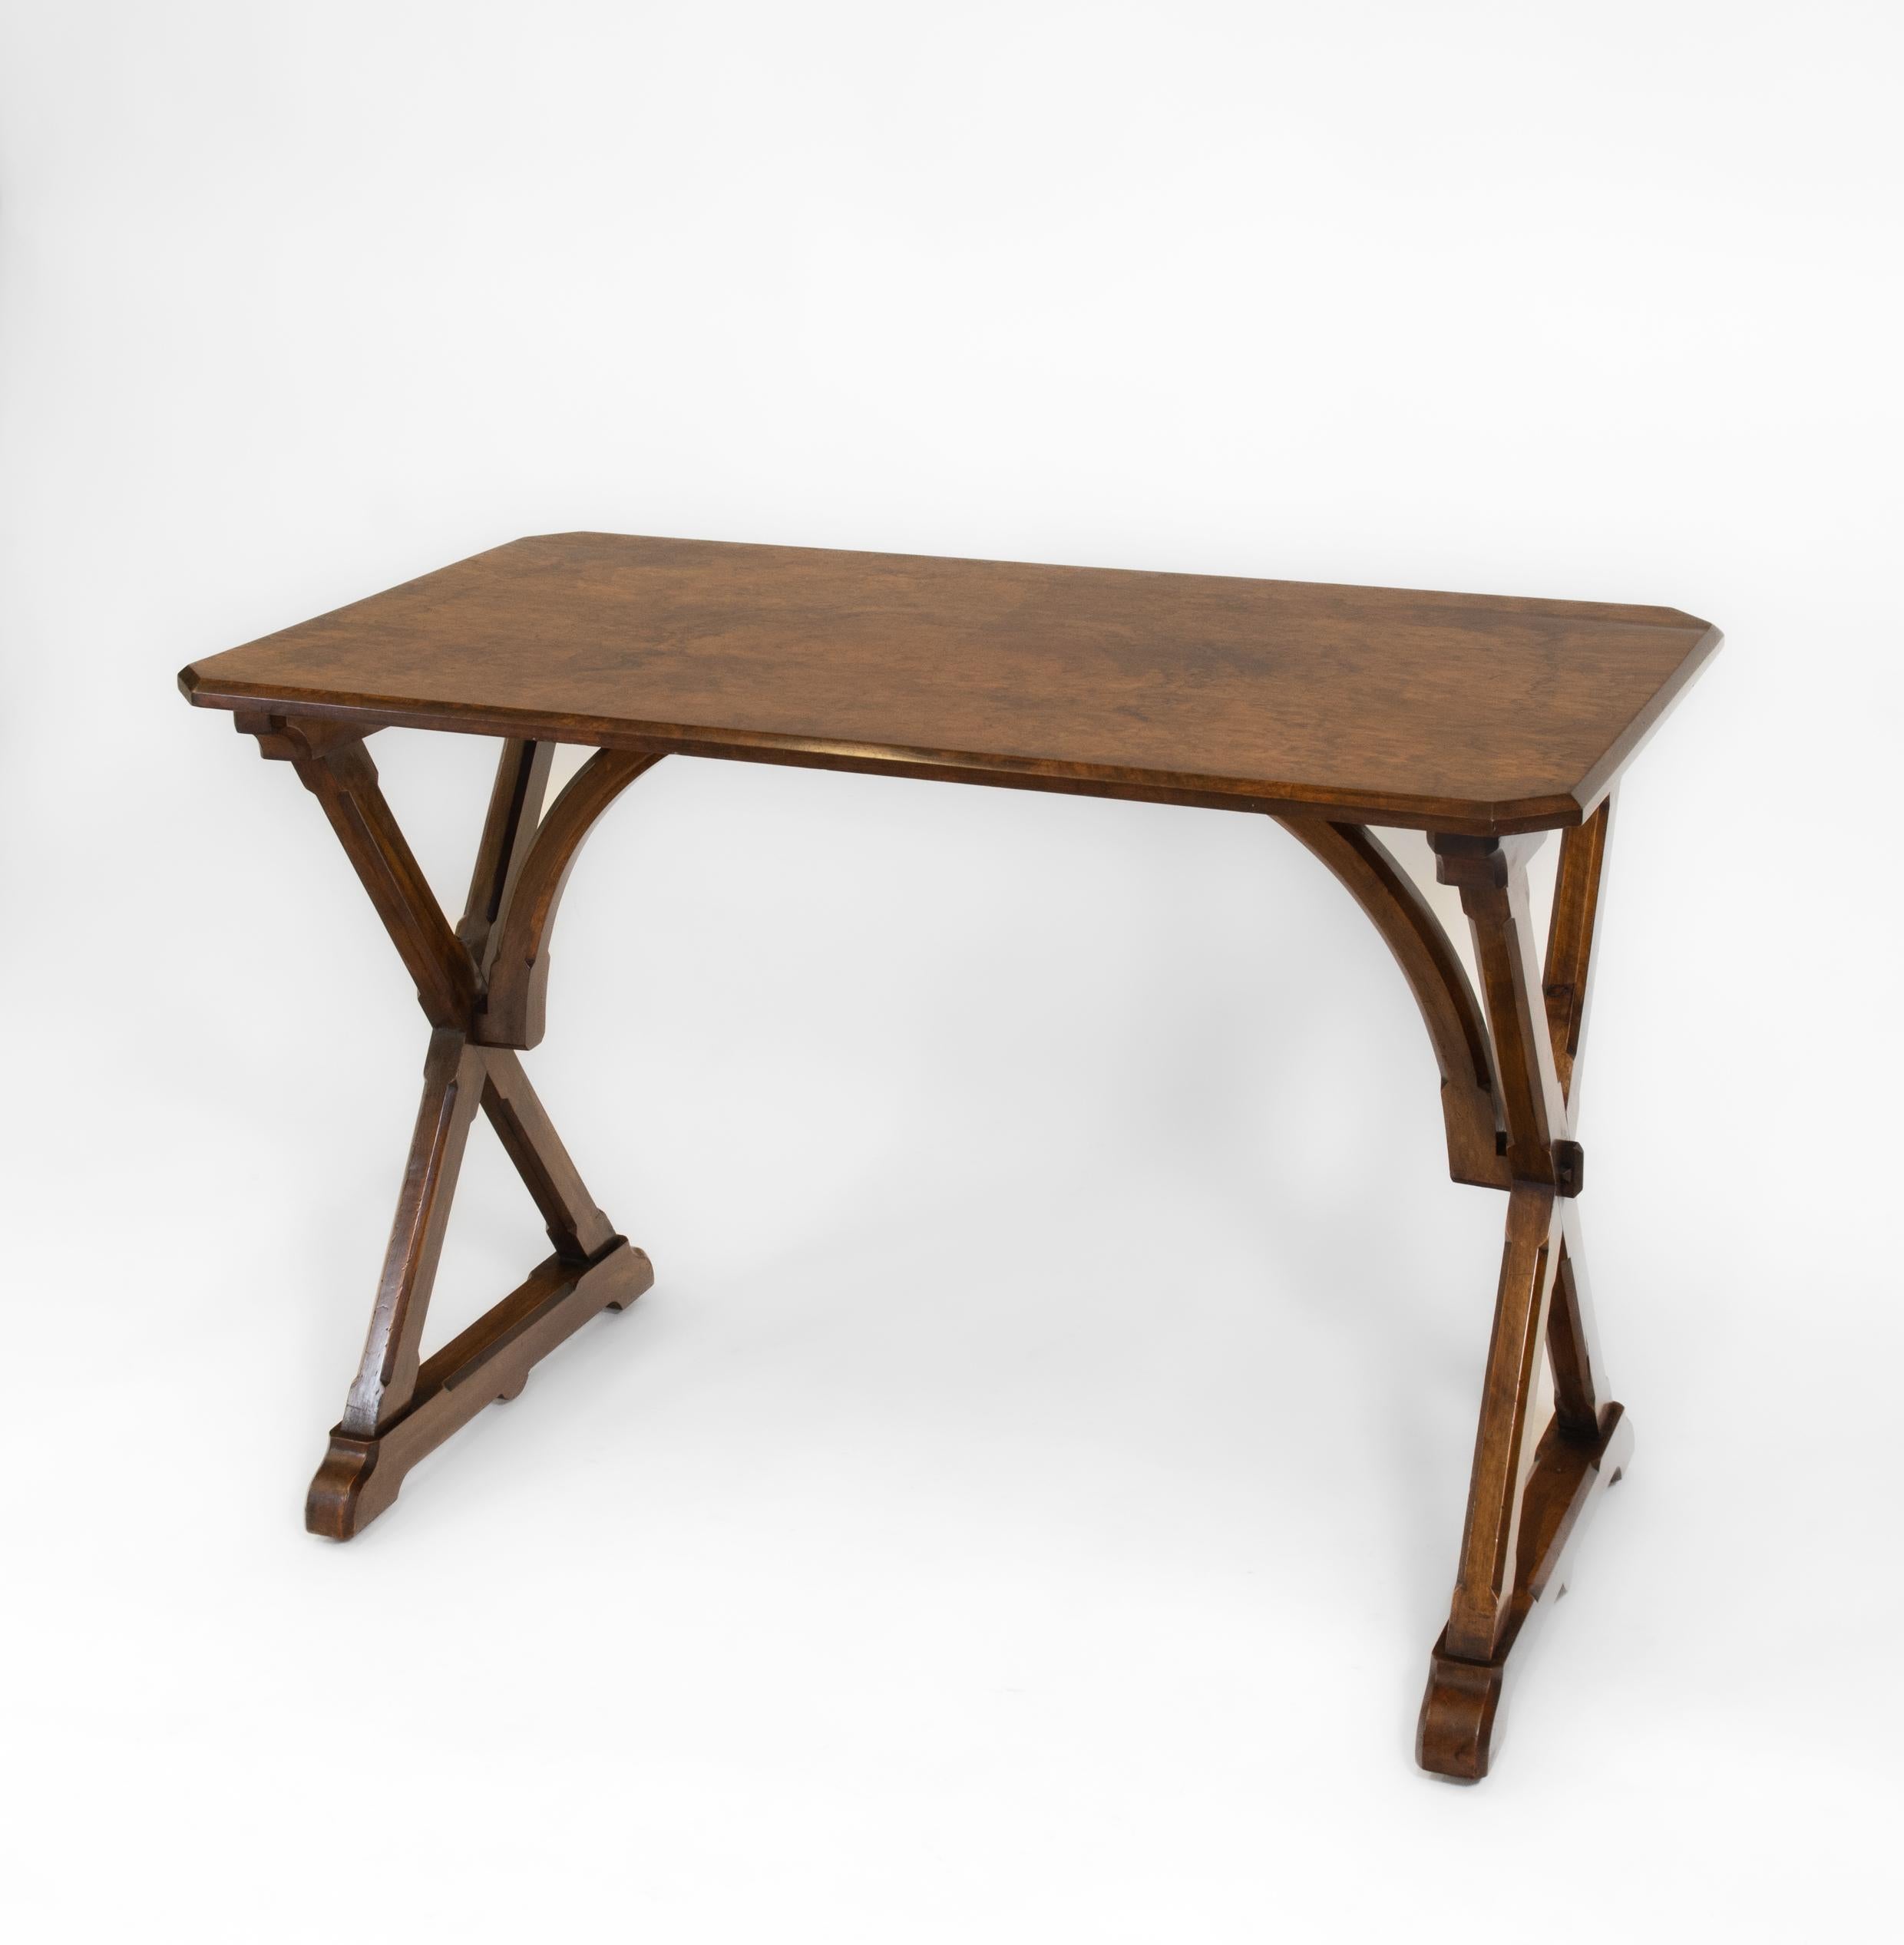 A 19th Century burr walnut and walnut Gothic Revival writing side table in the A W Pugin manner. English. Circa 1860.

The table having a burr walnut top with canted corners, supported on a walnut cross-frame with chamfered edging and visible pegs